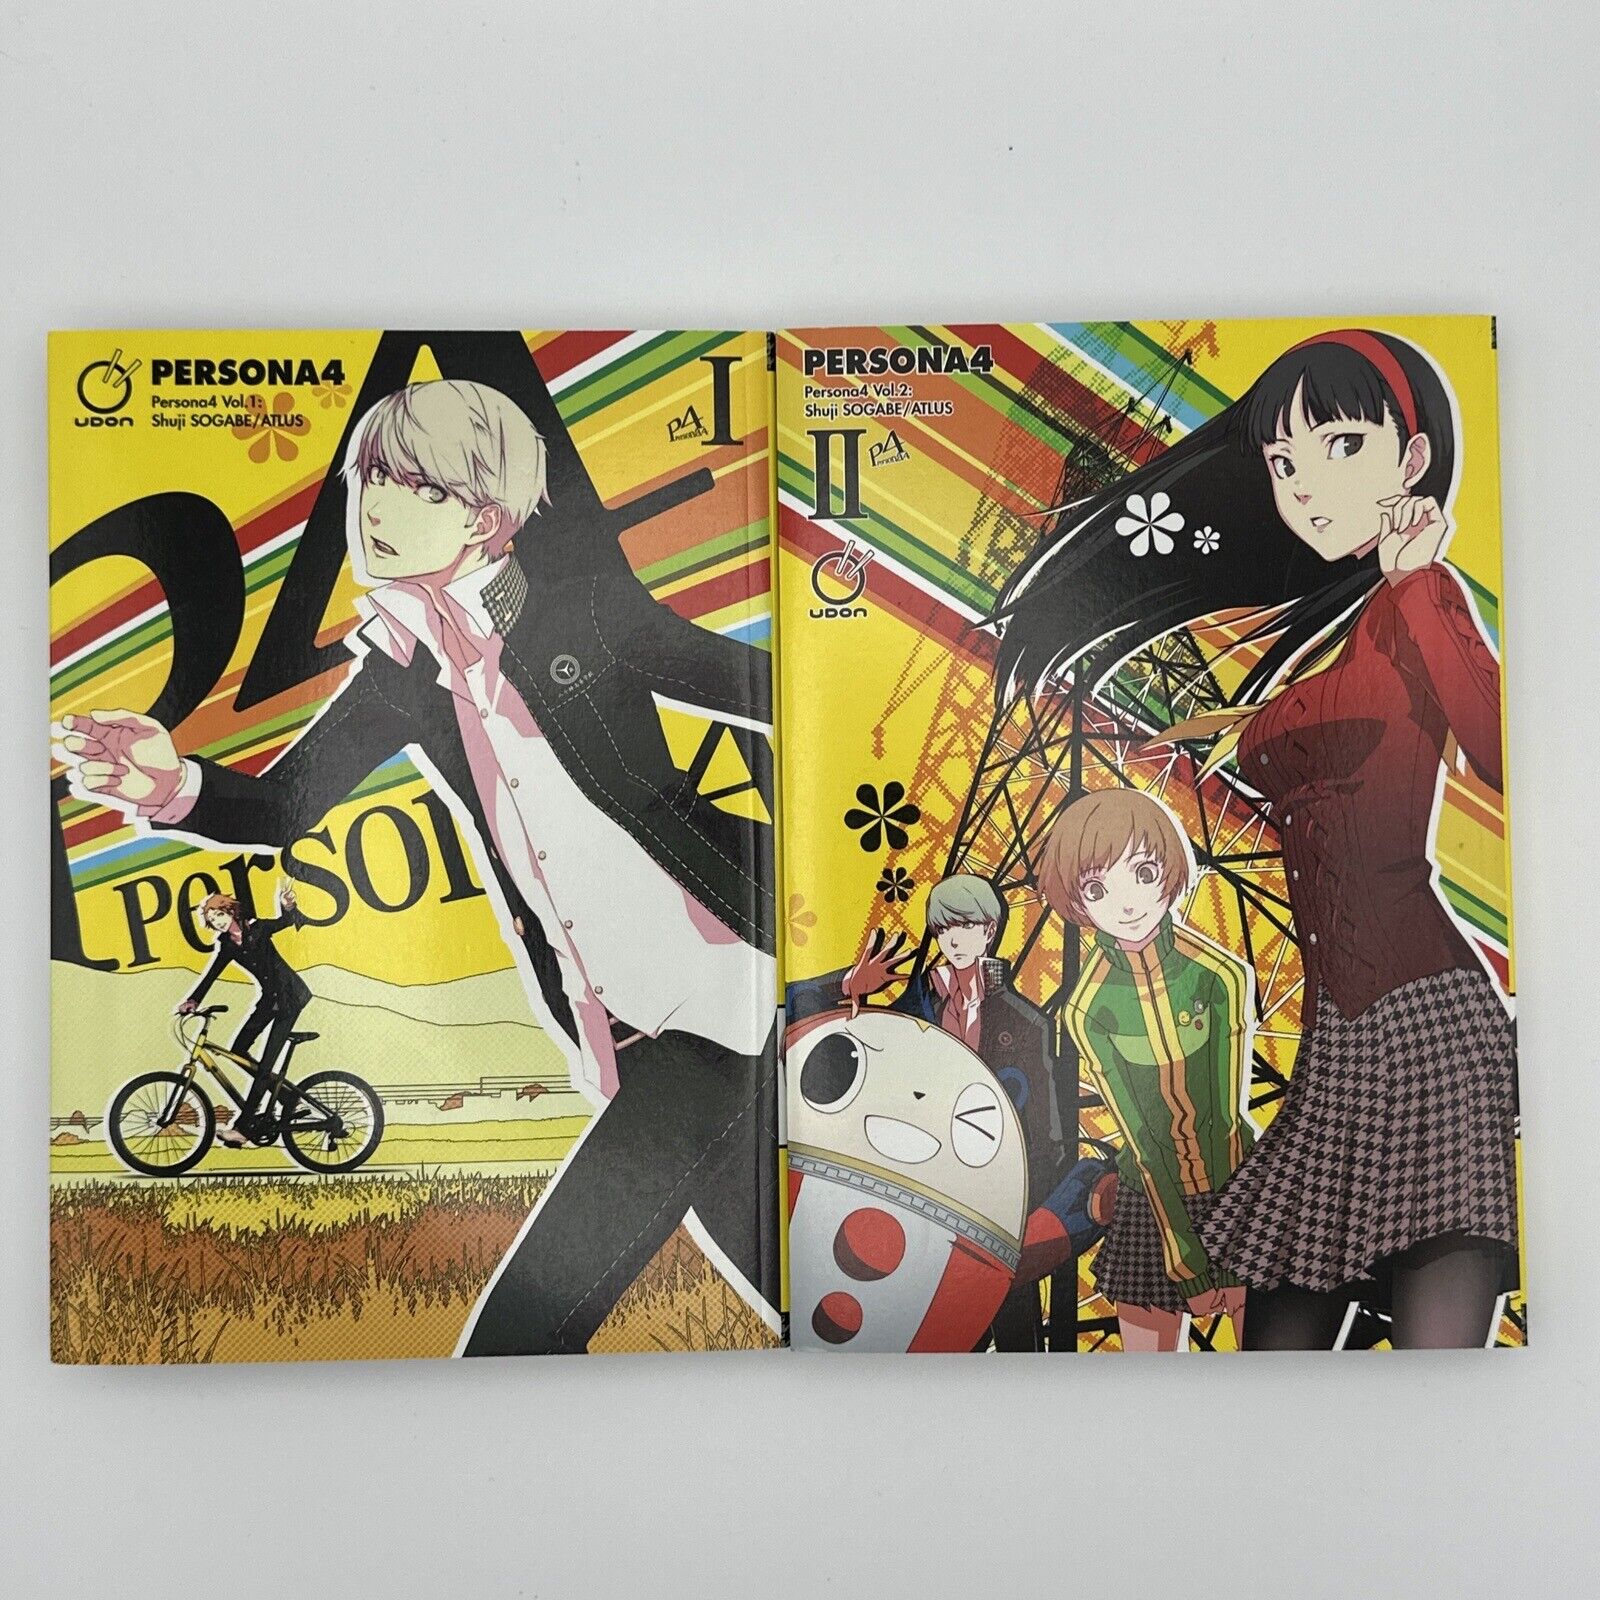 Persona 4 Volume 1 + 2 Lot (Persona 4 Gn) by Atlus Book Fast  Manga